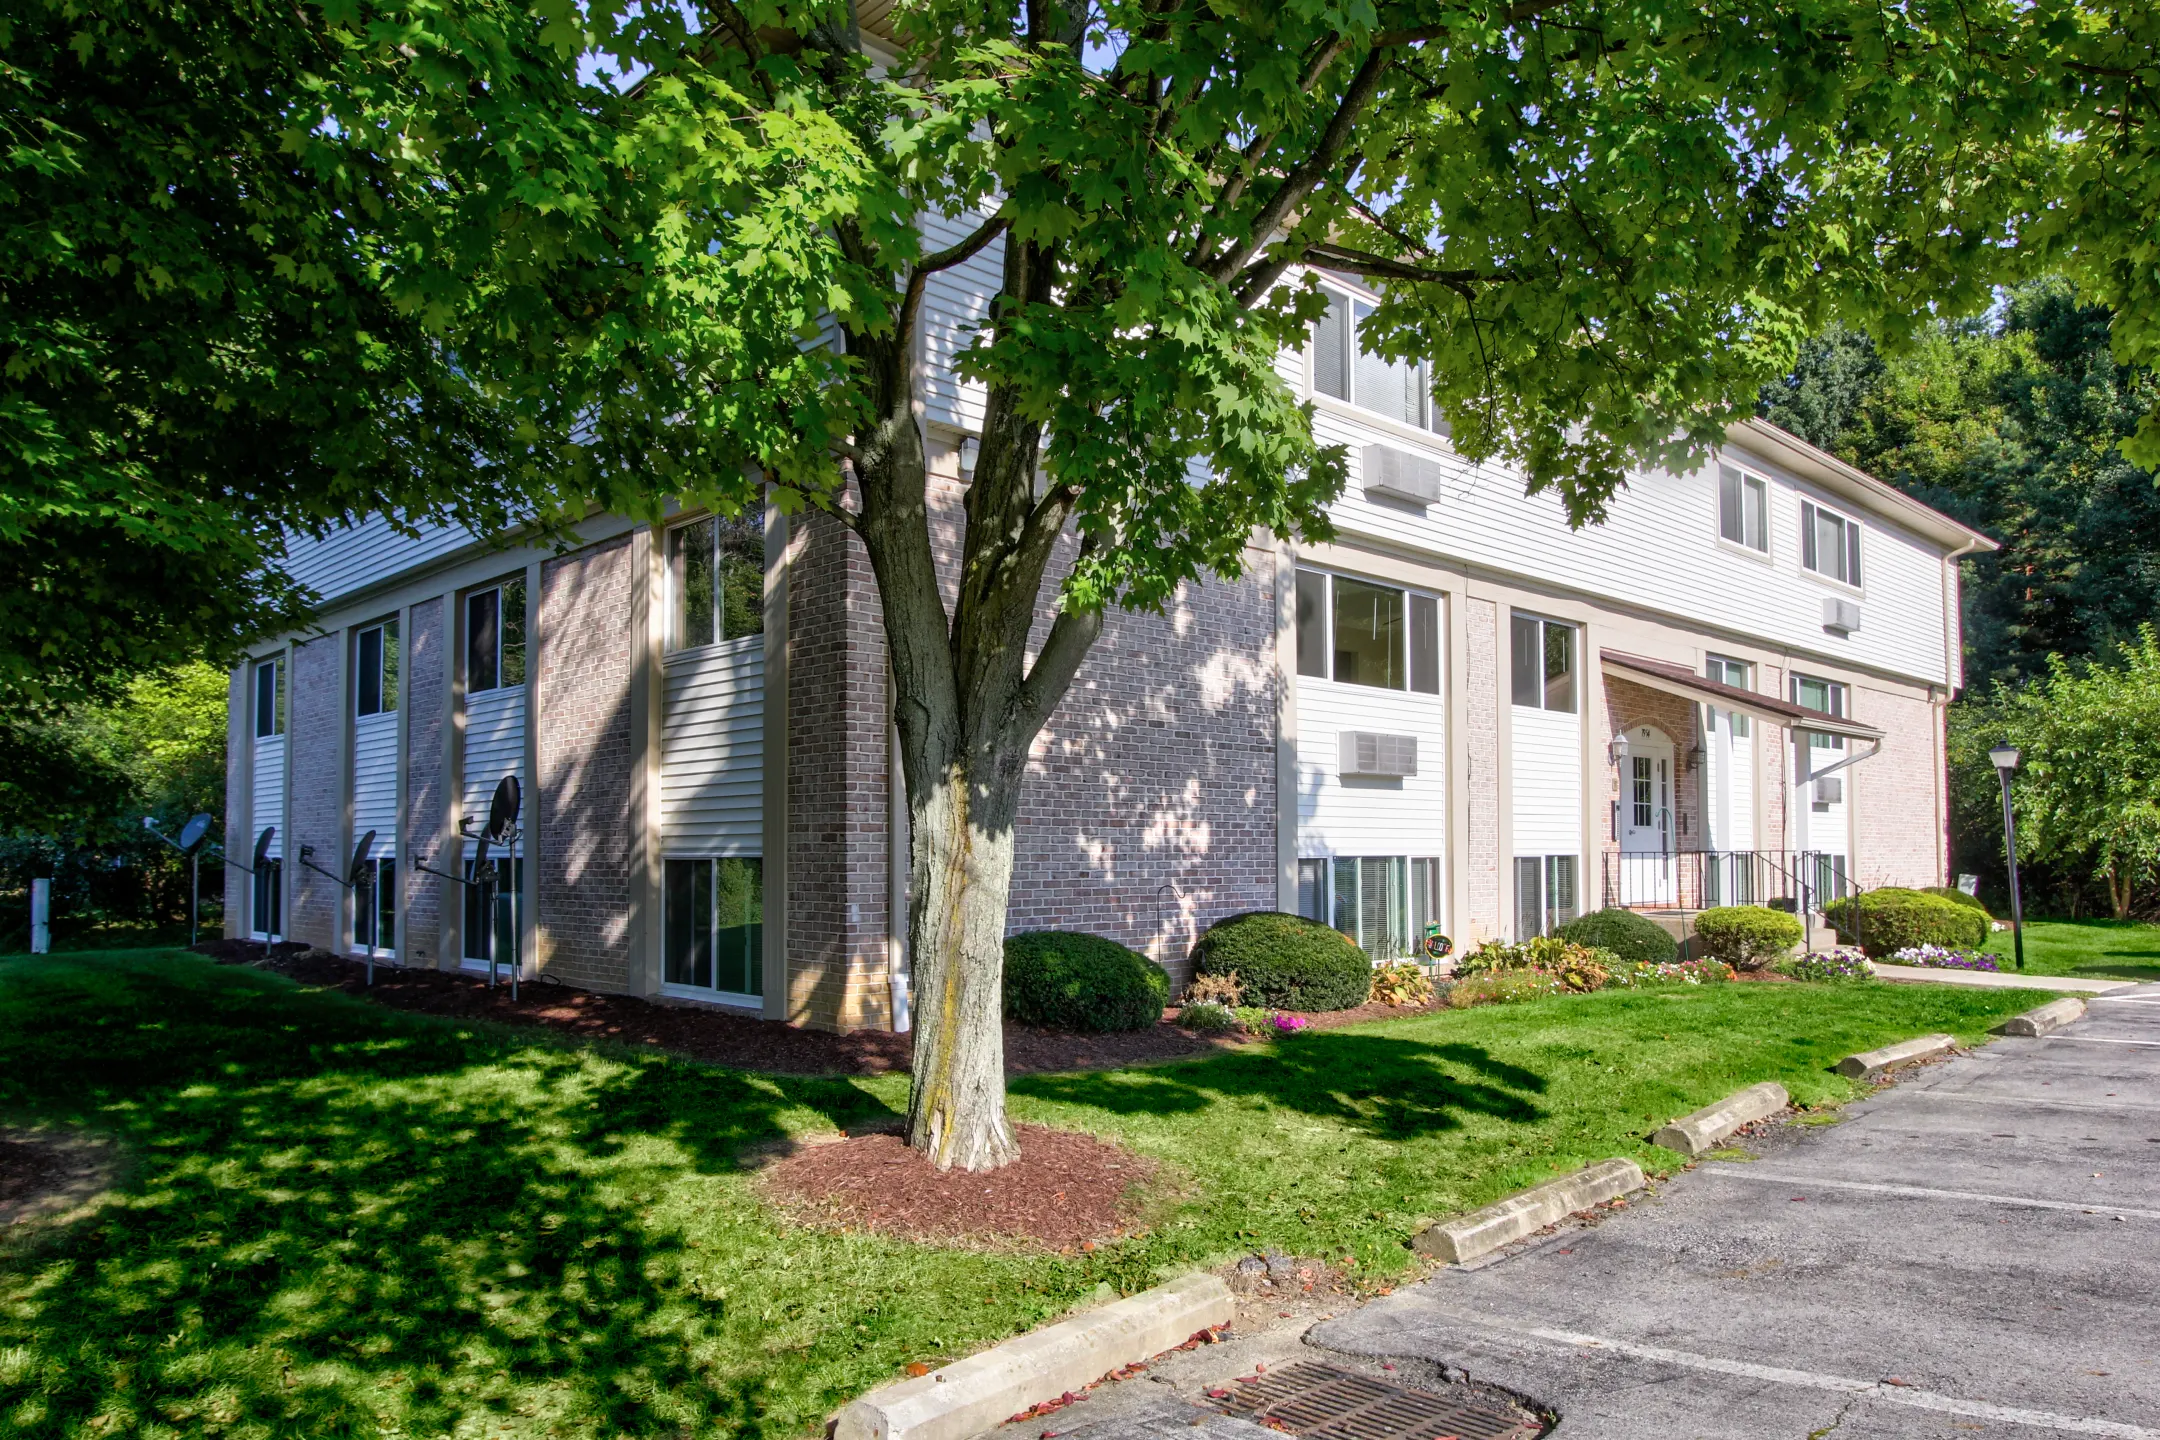 Building - Cambridge Square Apartments - Youngstown, OH